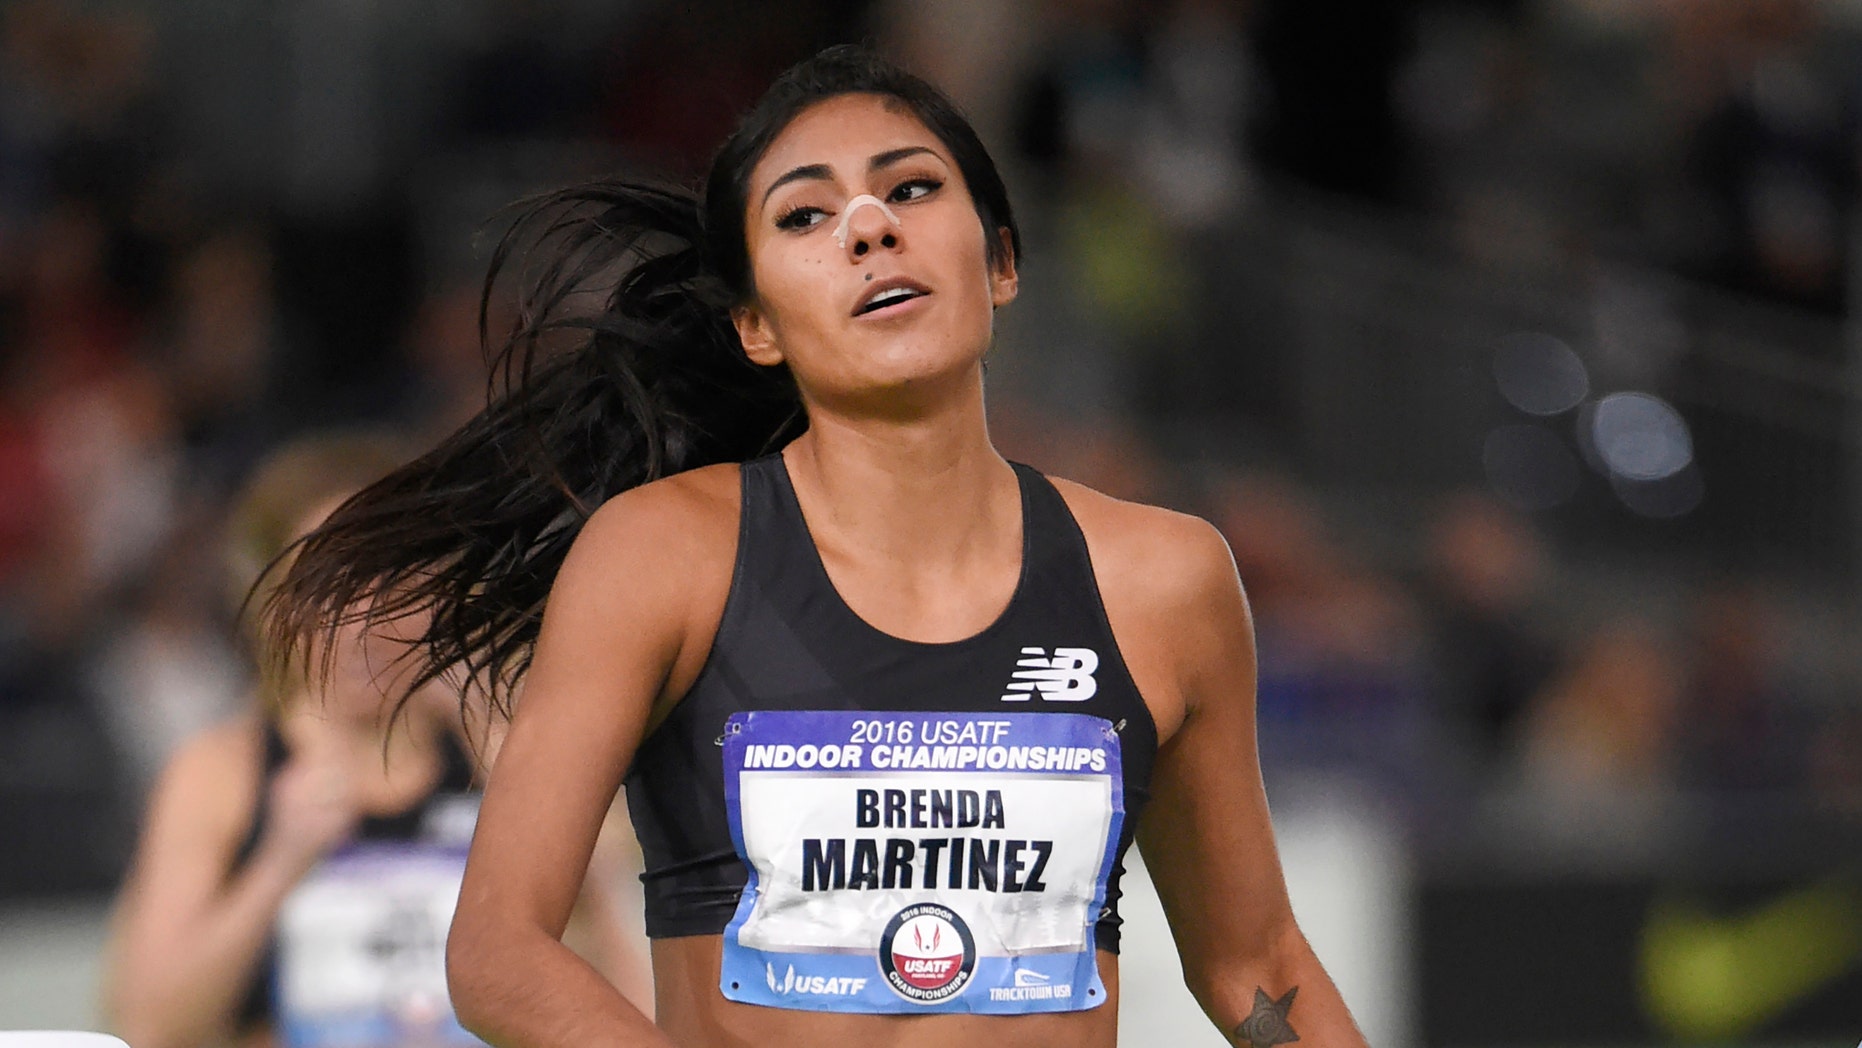 Top U.S. runner Brenda Martinez lashes out about doping: 'We have been robbed' | Fox News